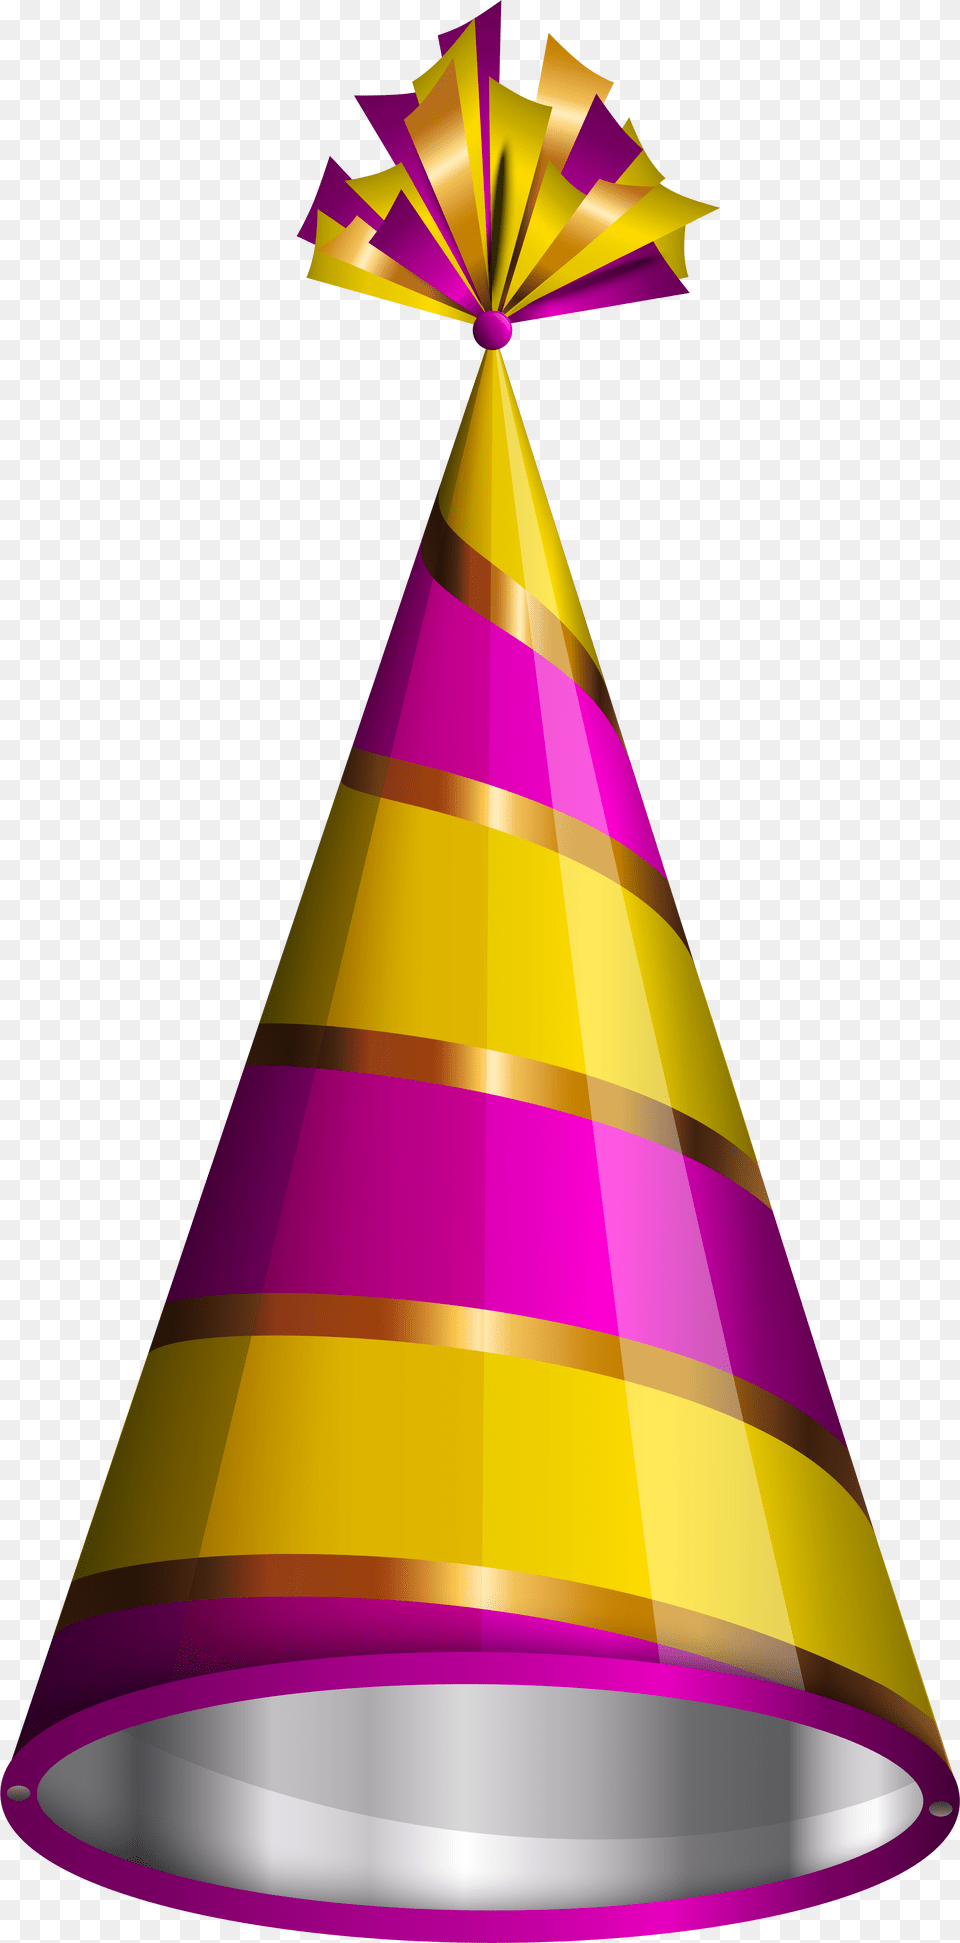 Birthday Party Hat Clipart Image Birthday Hat Transparent, Clothing, Party Hat, Rocket, Weapon Png